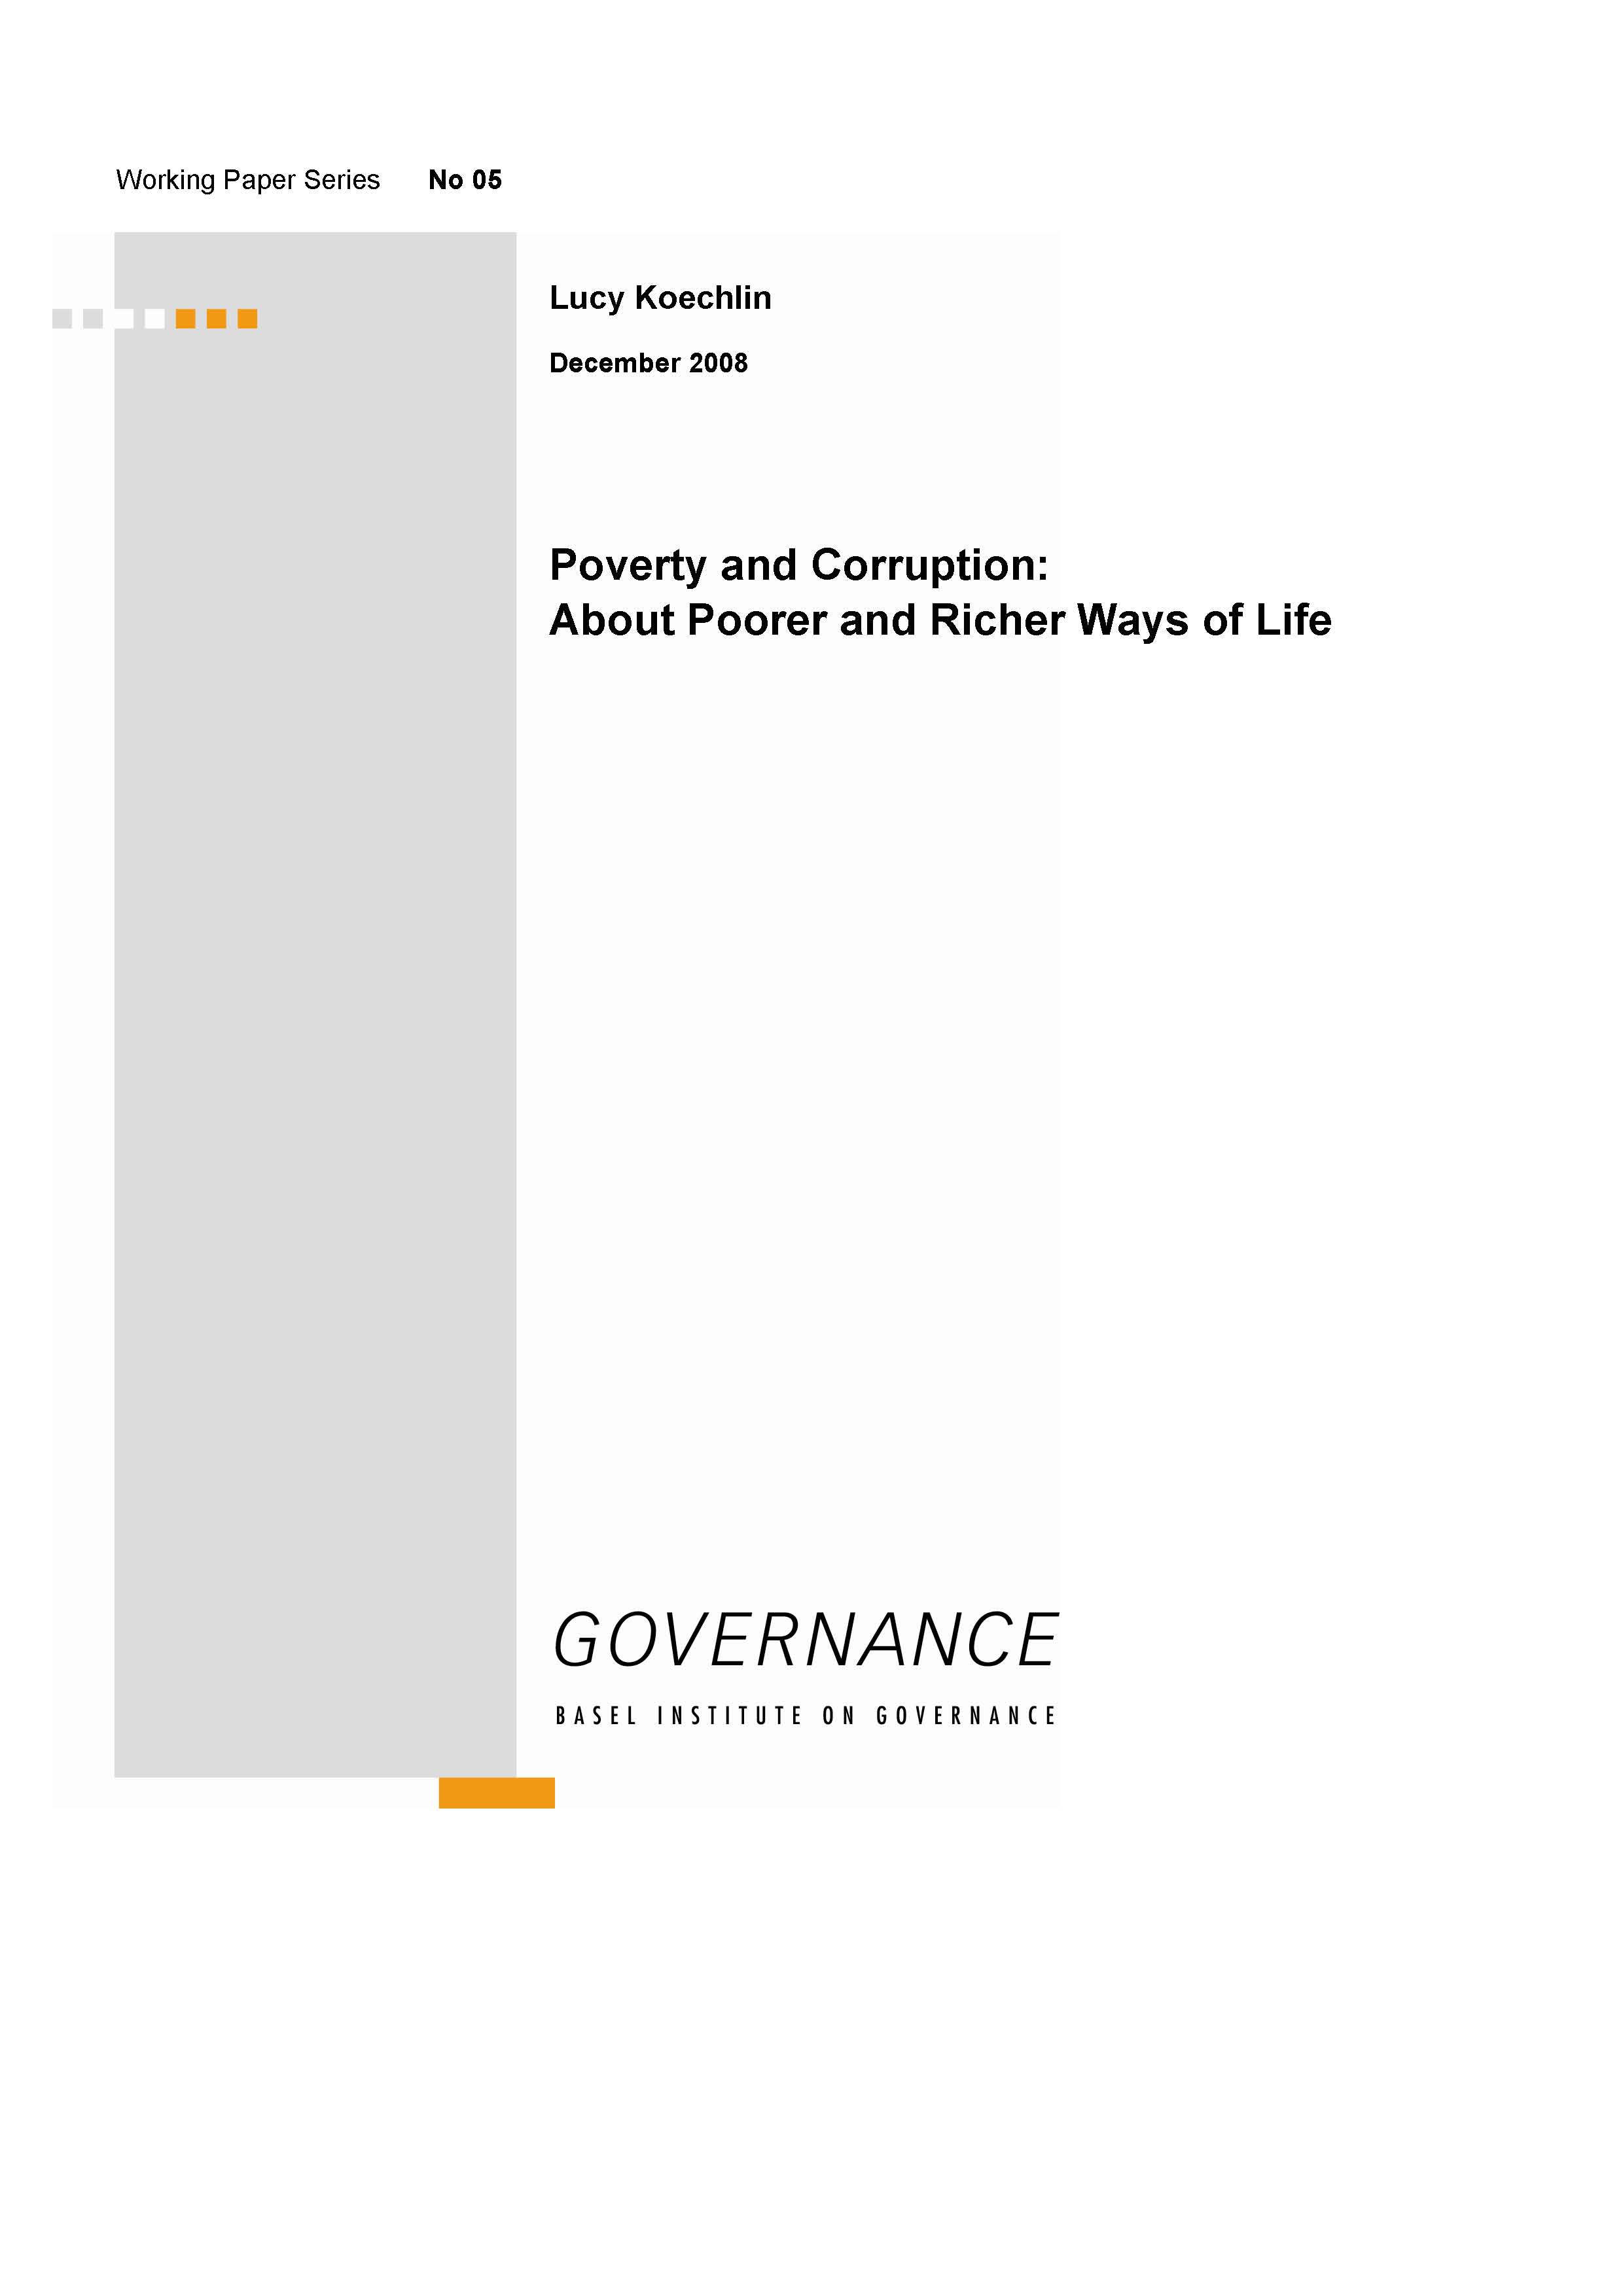 Cover page of Working Paper 5